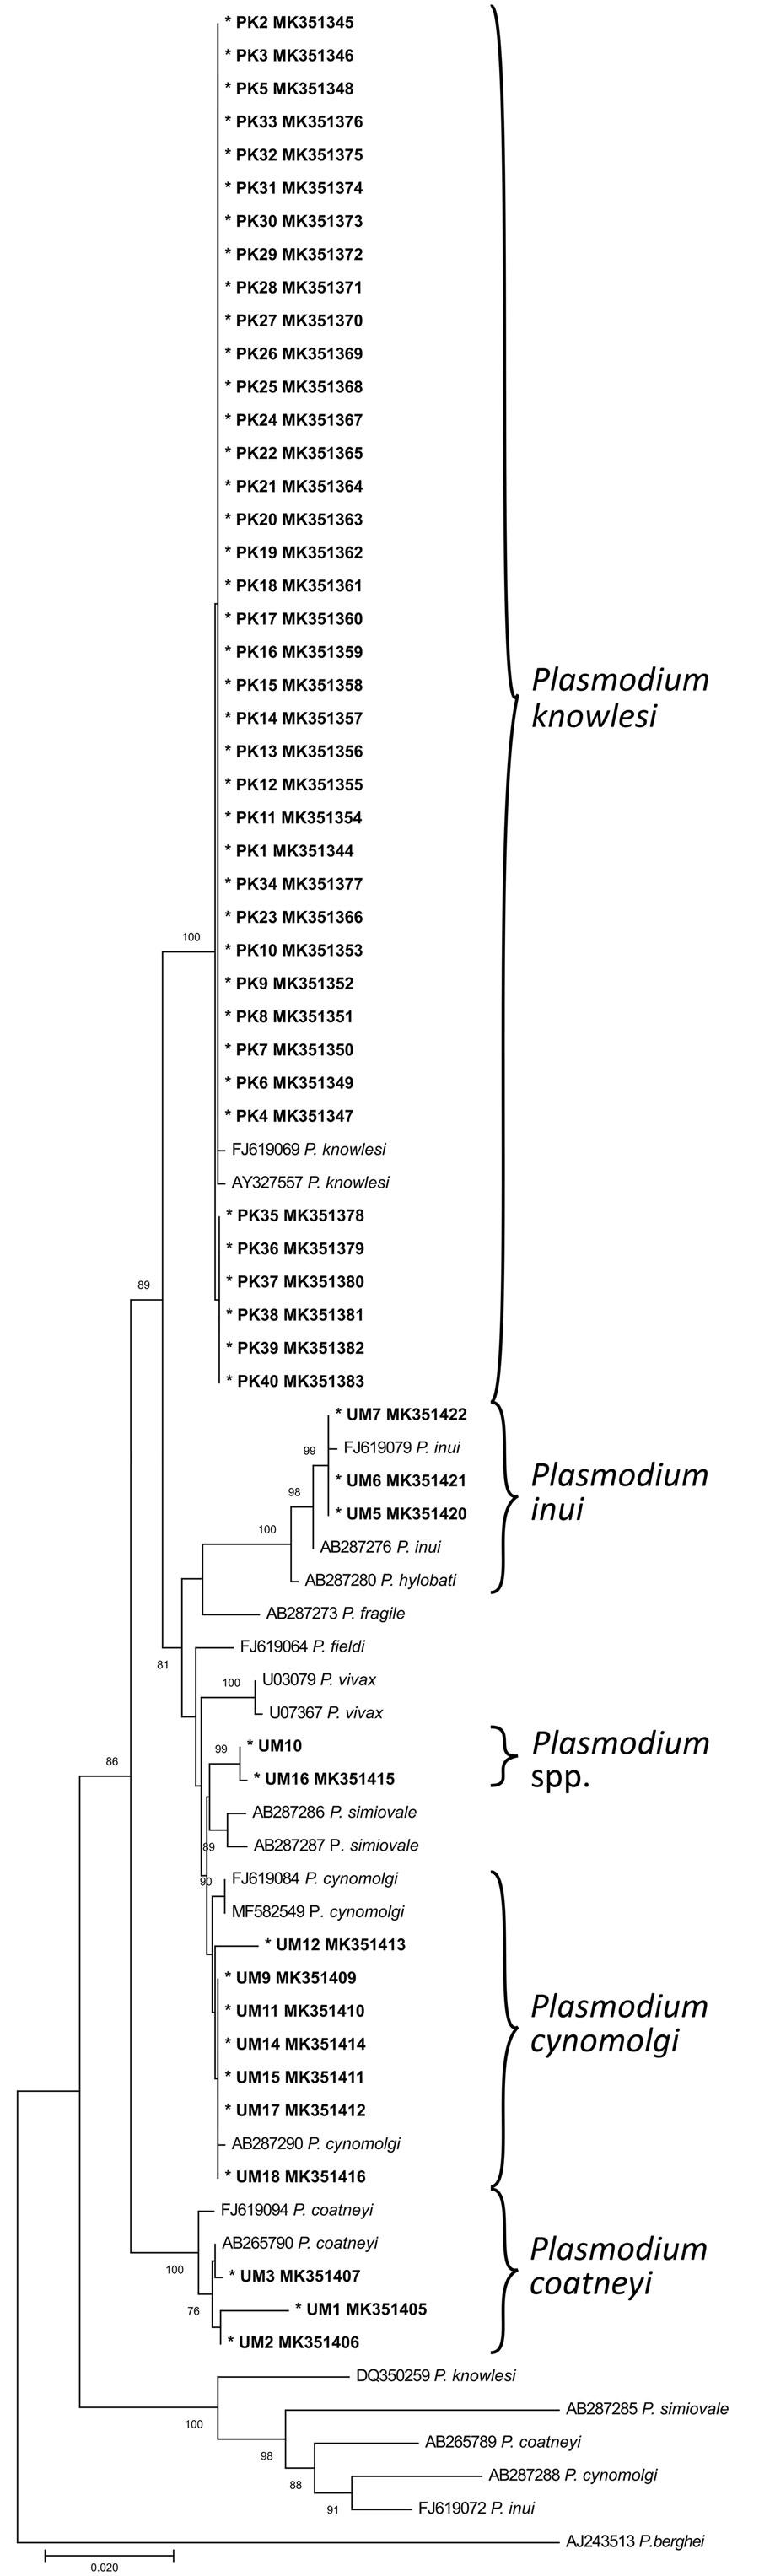 Neighbor-joining phylogenetic tree of Plasmodium species based on partial sequence of SSU rRNA genes for identification of Plasmodium malaria species from indigenous community blood samples, Malaysia. Nucleotide sequences generated from this study are marked with asterisks and are in bold. GenBank accession numbers are provided for all sequences. Numbers at nodes indicate percentage support of 1,000 bootstrap replicates; only bootstrap values above 70% are displayed. Scale bar indicates branch length.